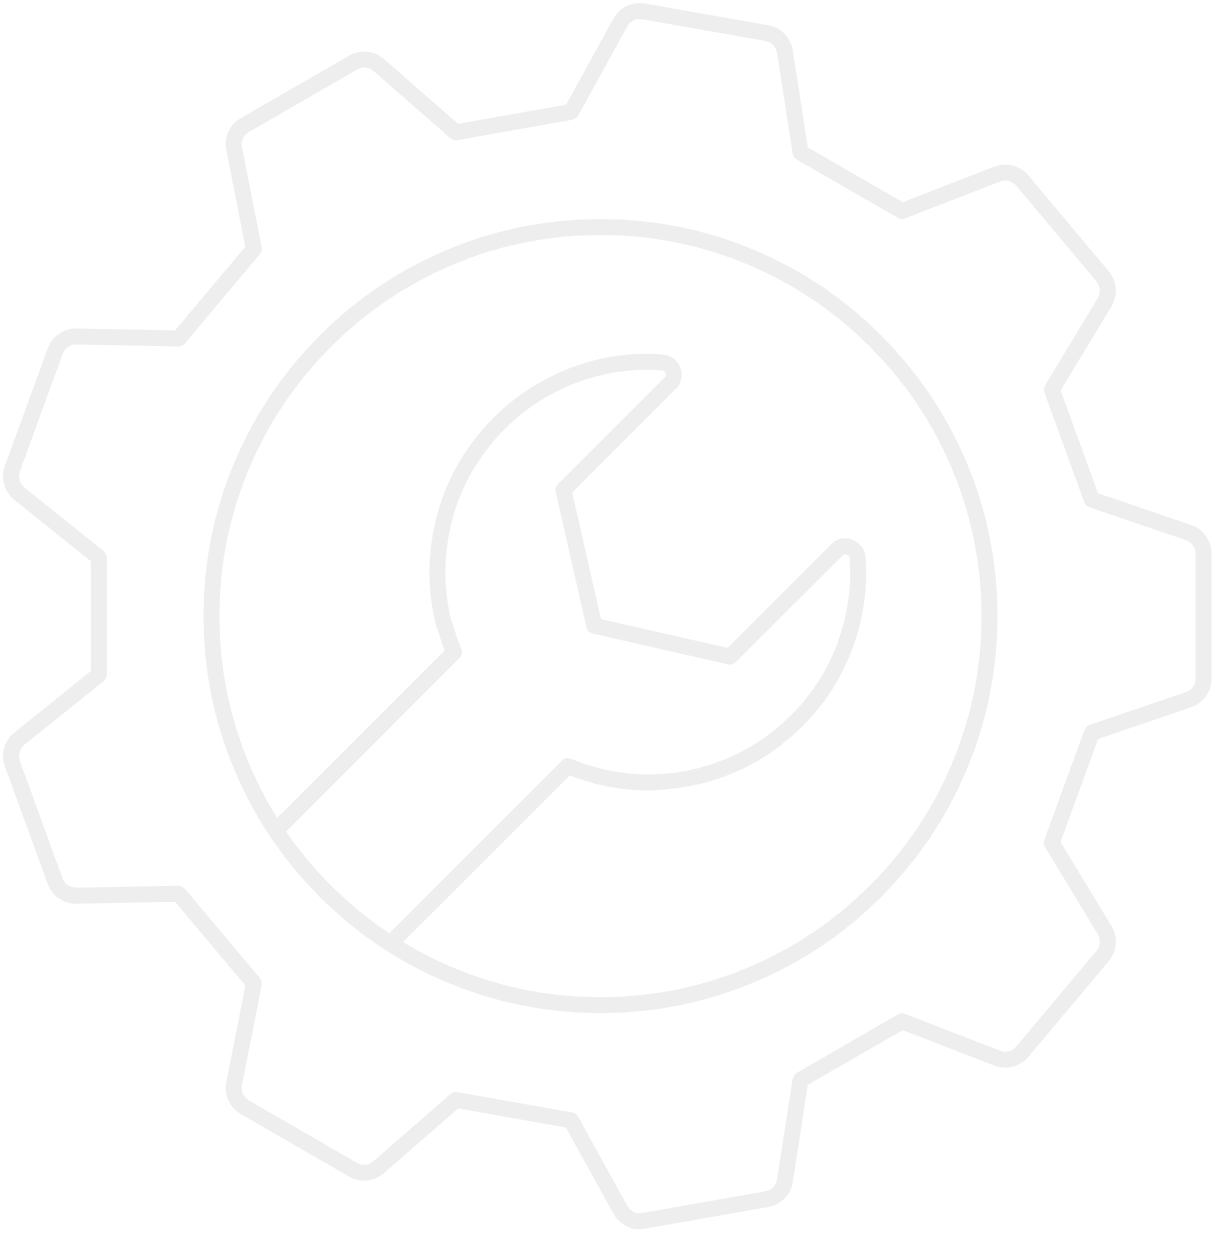 wrench-in-gear-icon